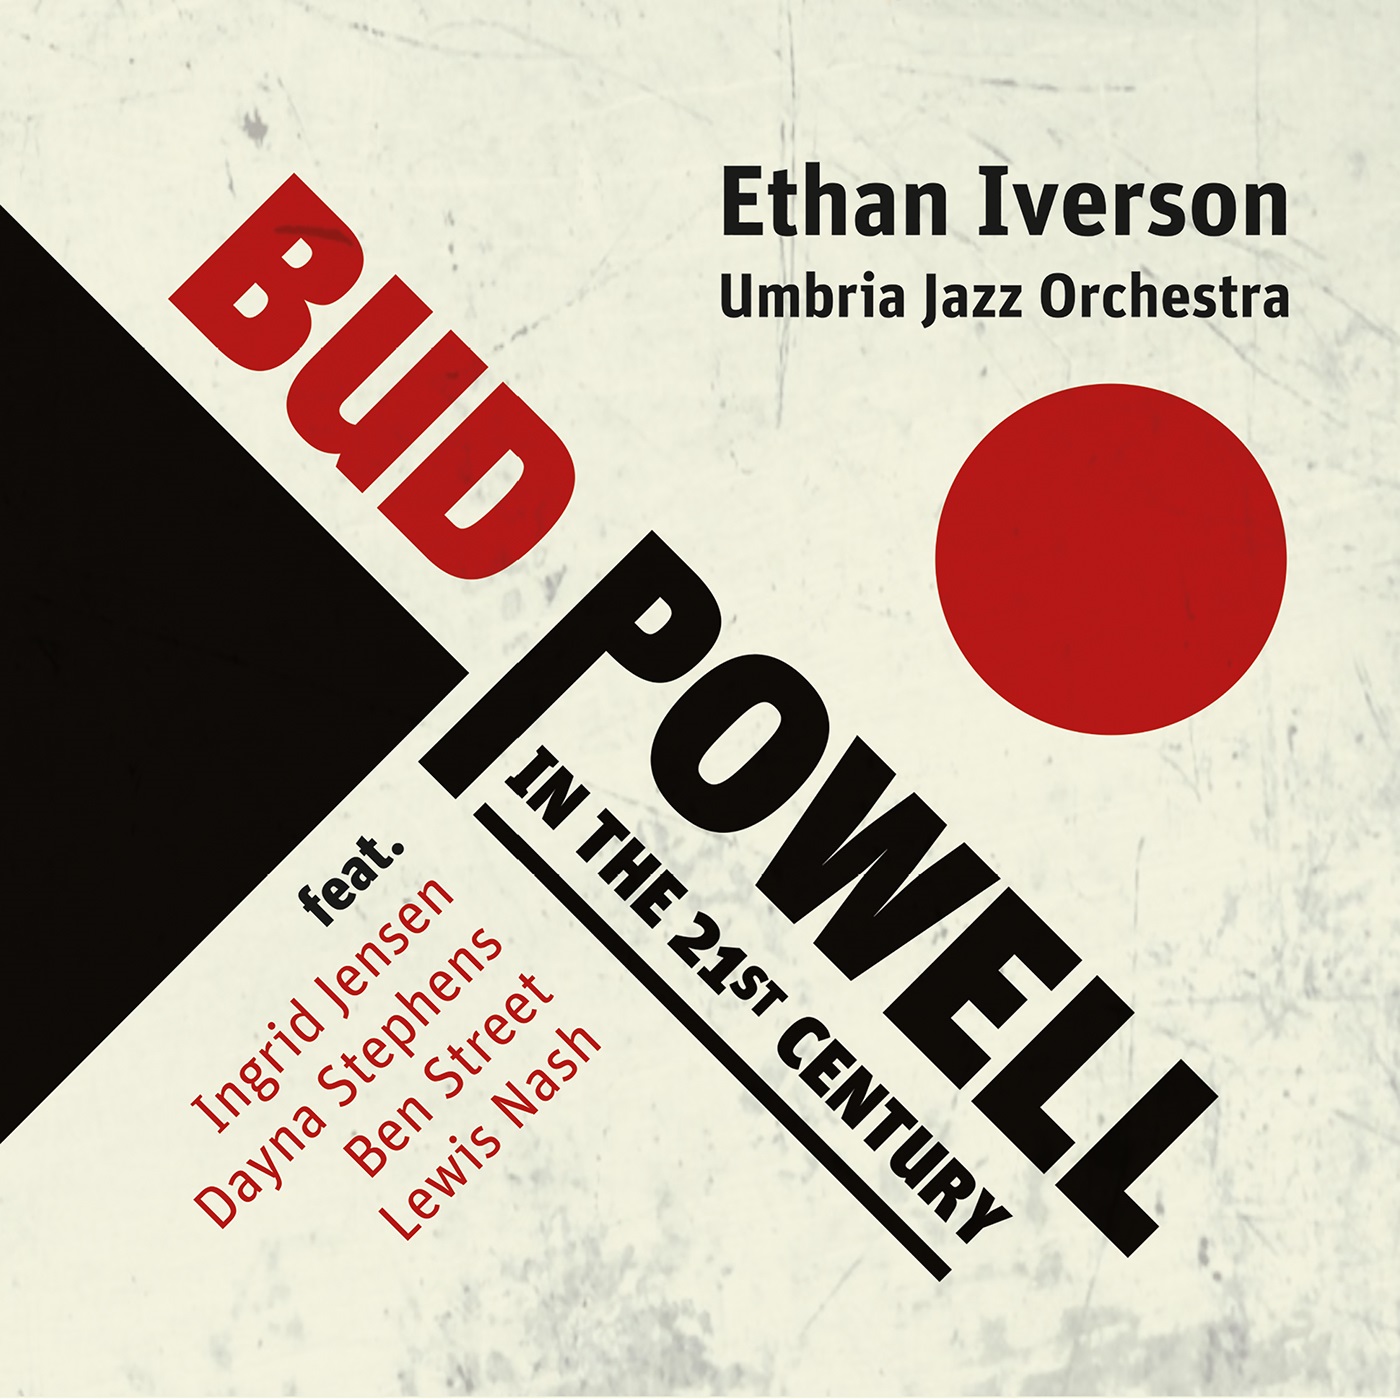 Ethan Iverson - Bud Powell In The 21st Century (2021) [FLAC 24bit/96kHz]